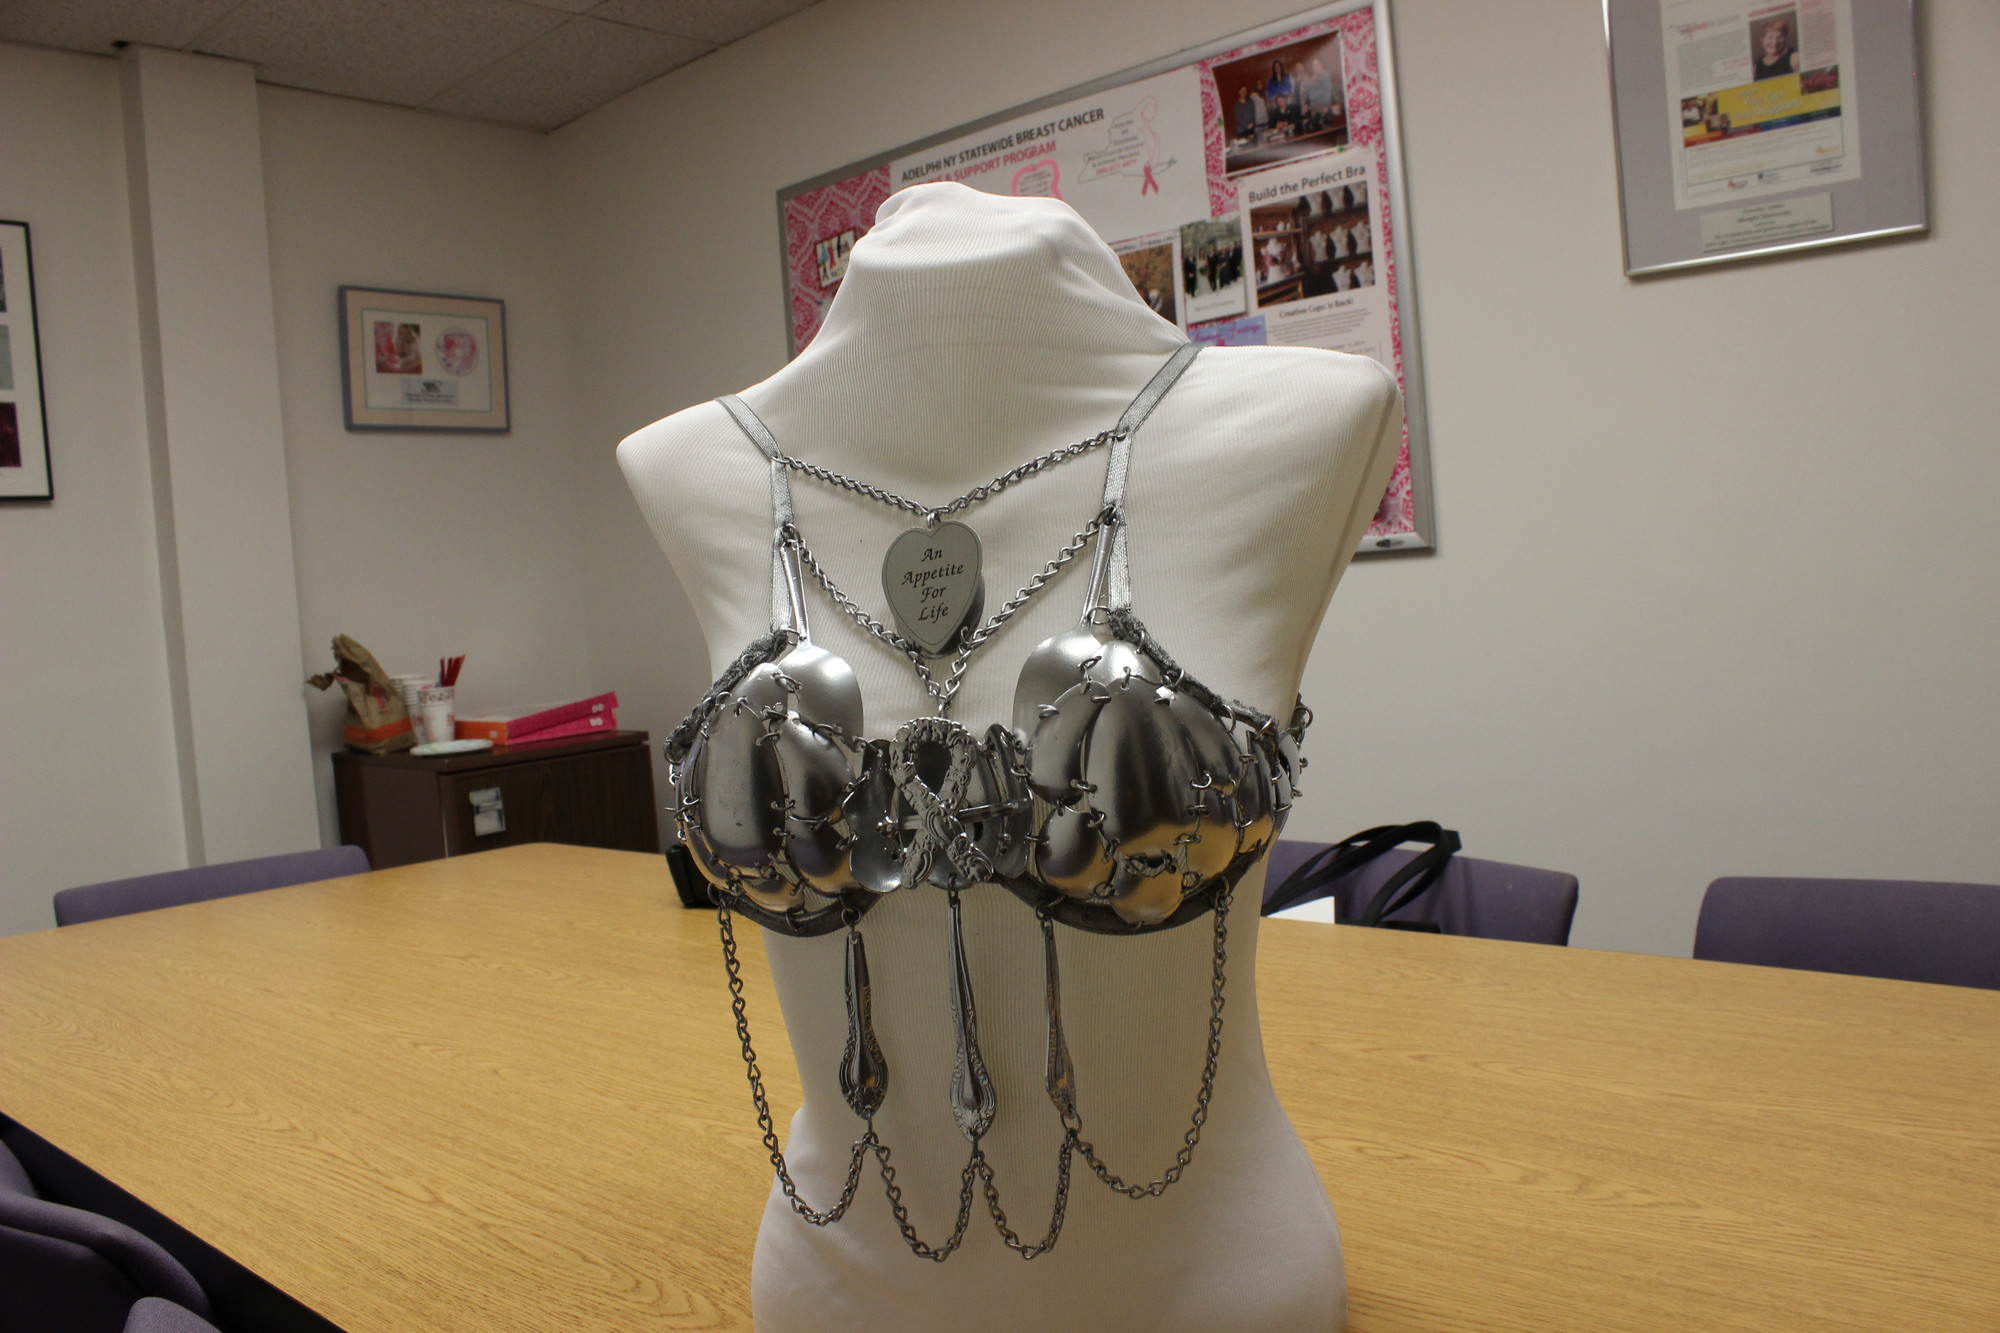 Bra fitters have their breasts turned into sculptures in art celebration of  'boobs